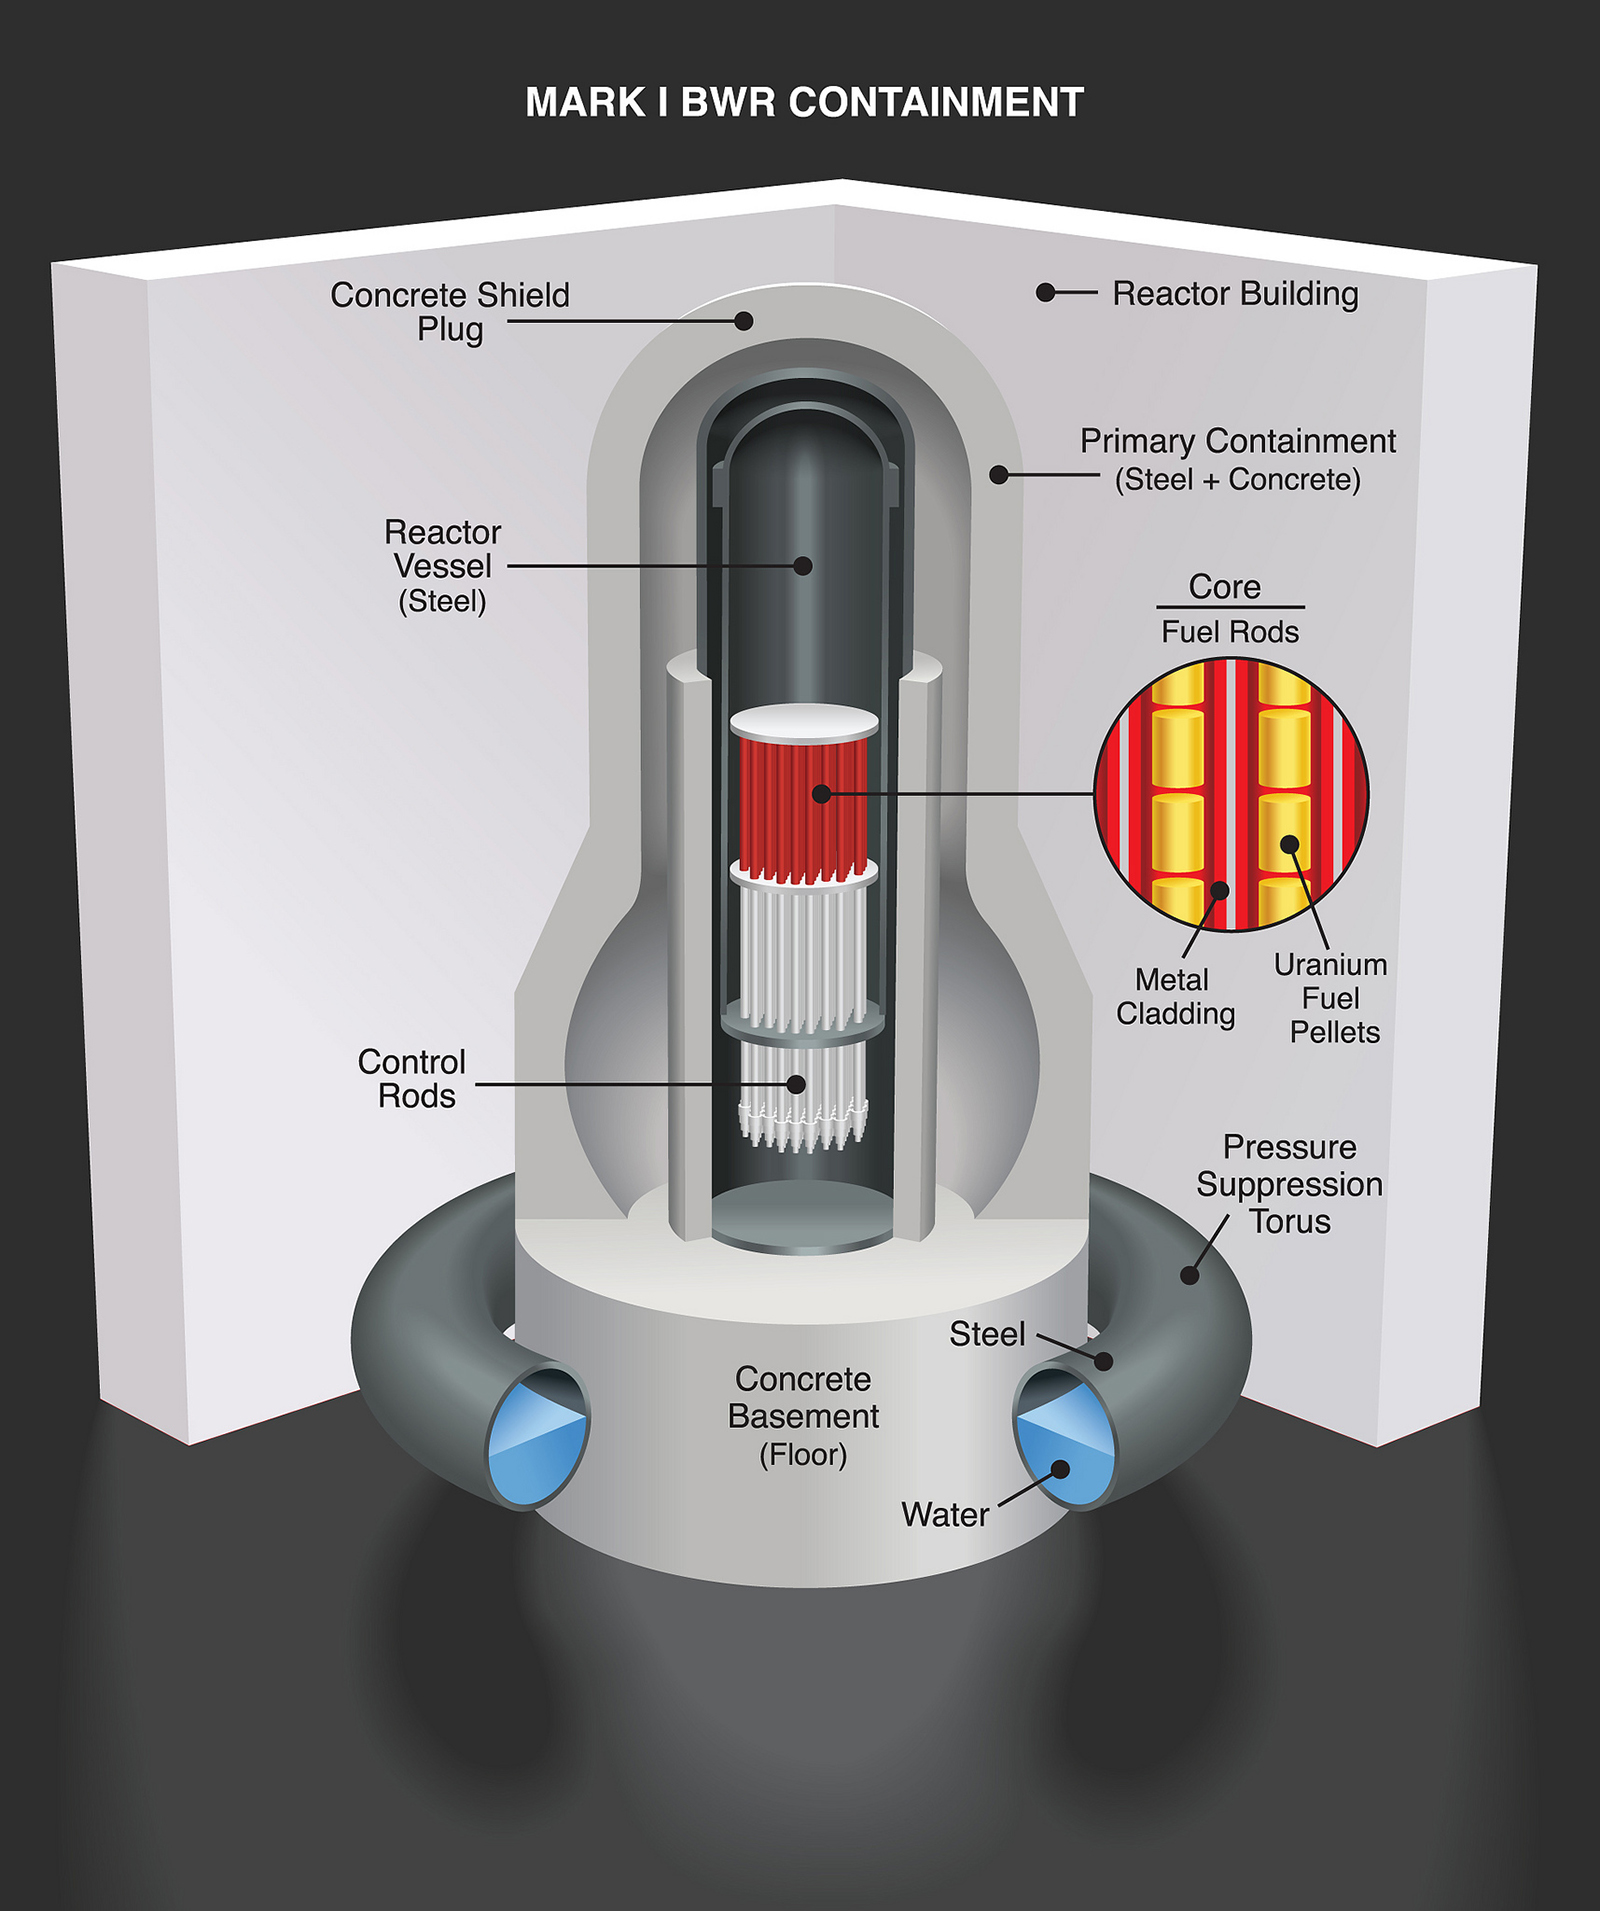 Cutaway diagram of Three Mark I boiling water reactors at Fukushima Daiichi shows the barriers in place to contain the fuel, including the primary containment, reactor vessel, and thick concrete basemat beneath the reactor. 